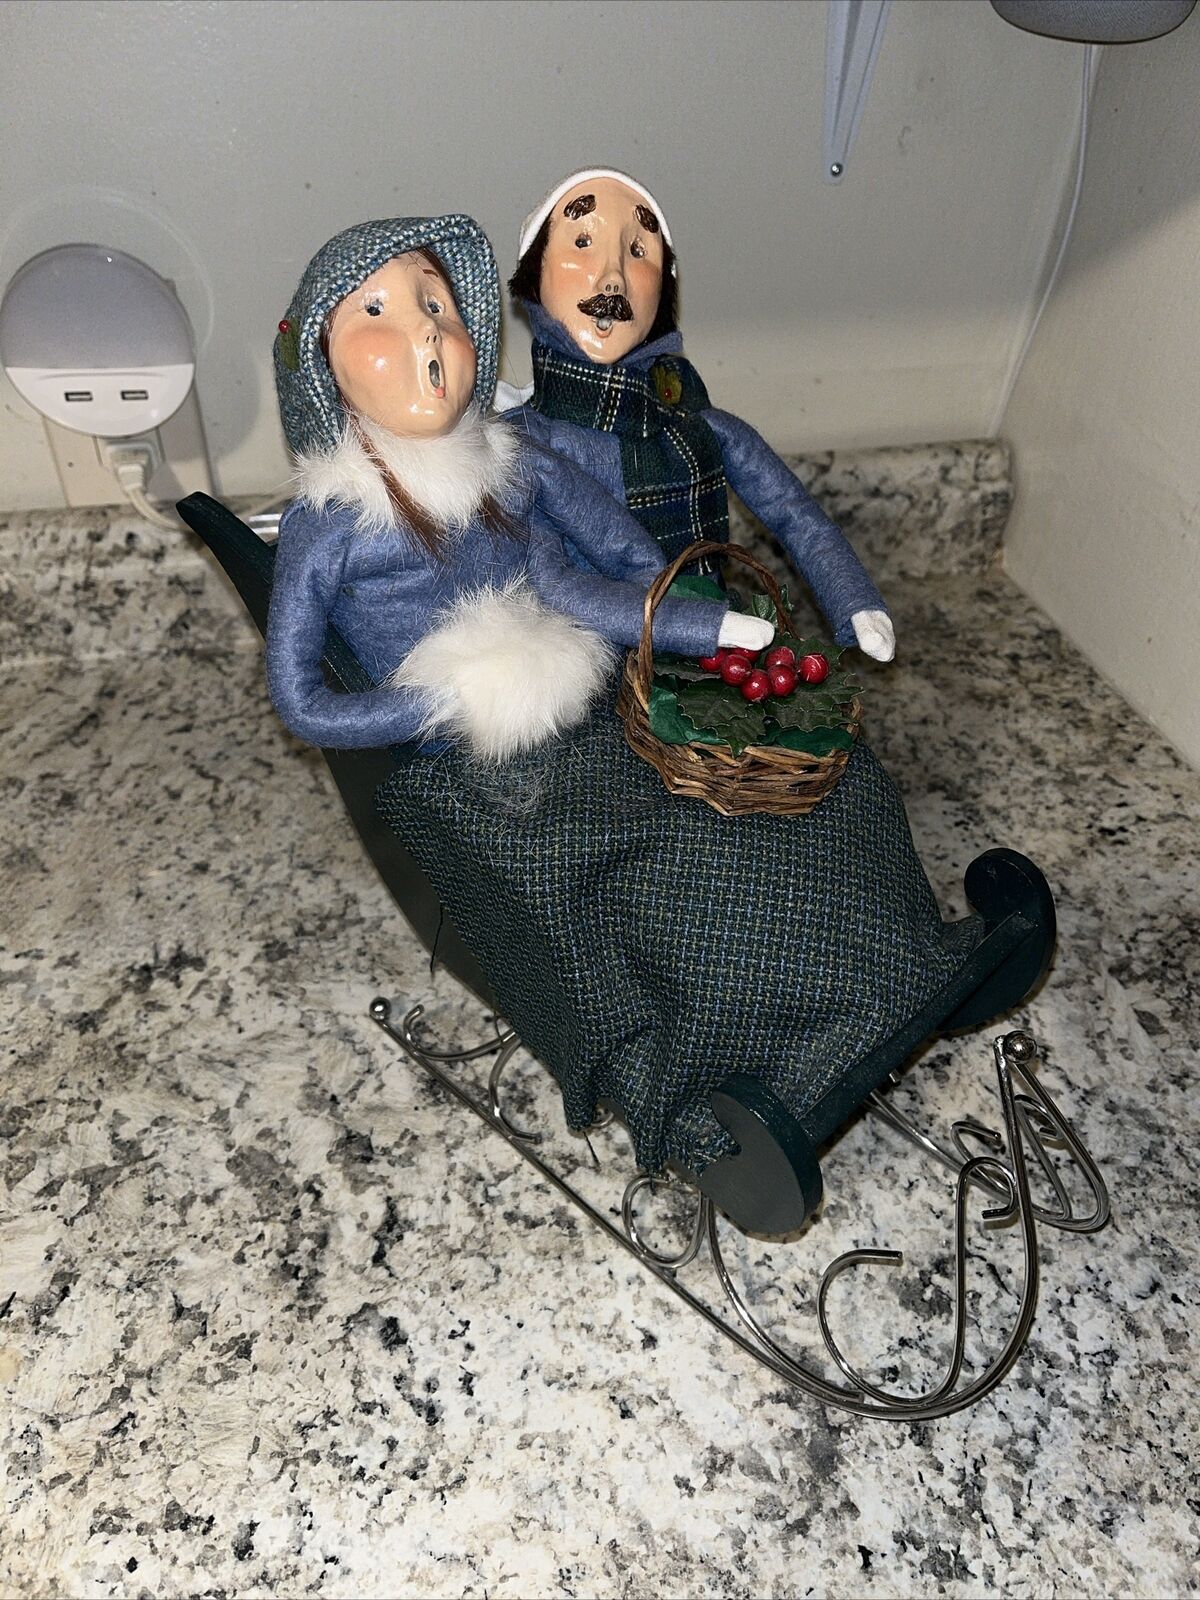 1995 Byers Choice Ltd Carolers Couple Man Woman in Christmas Sleigh Sled VINTAGE